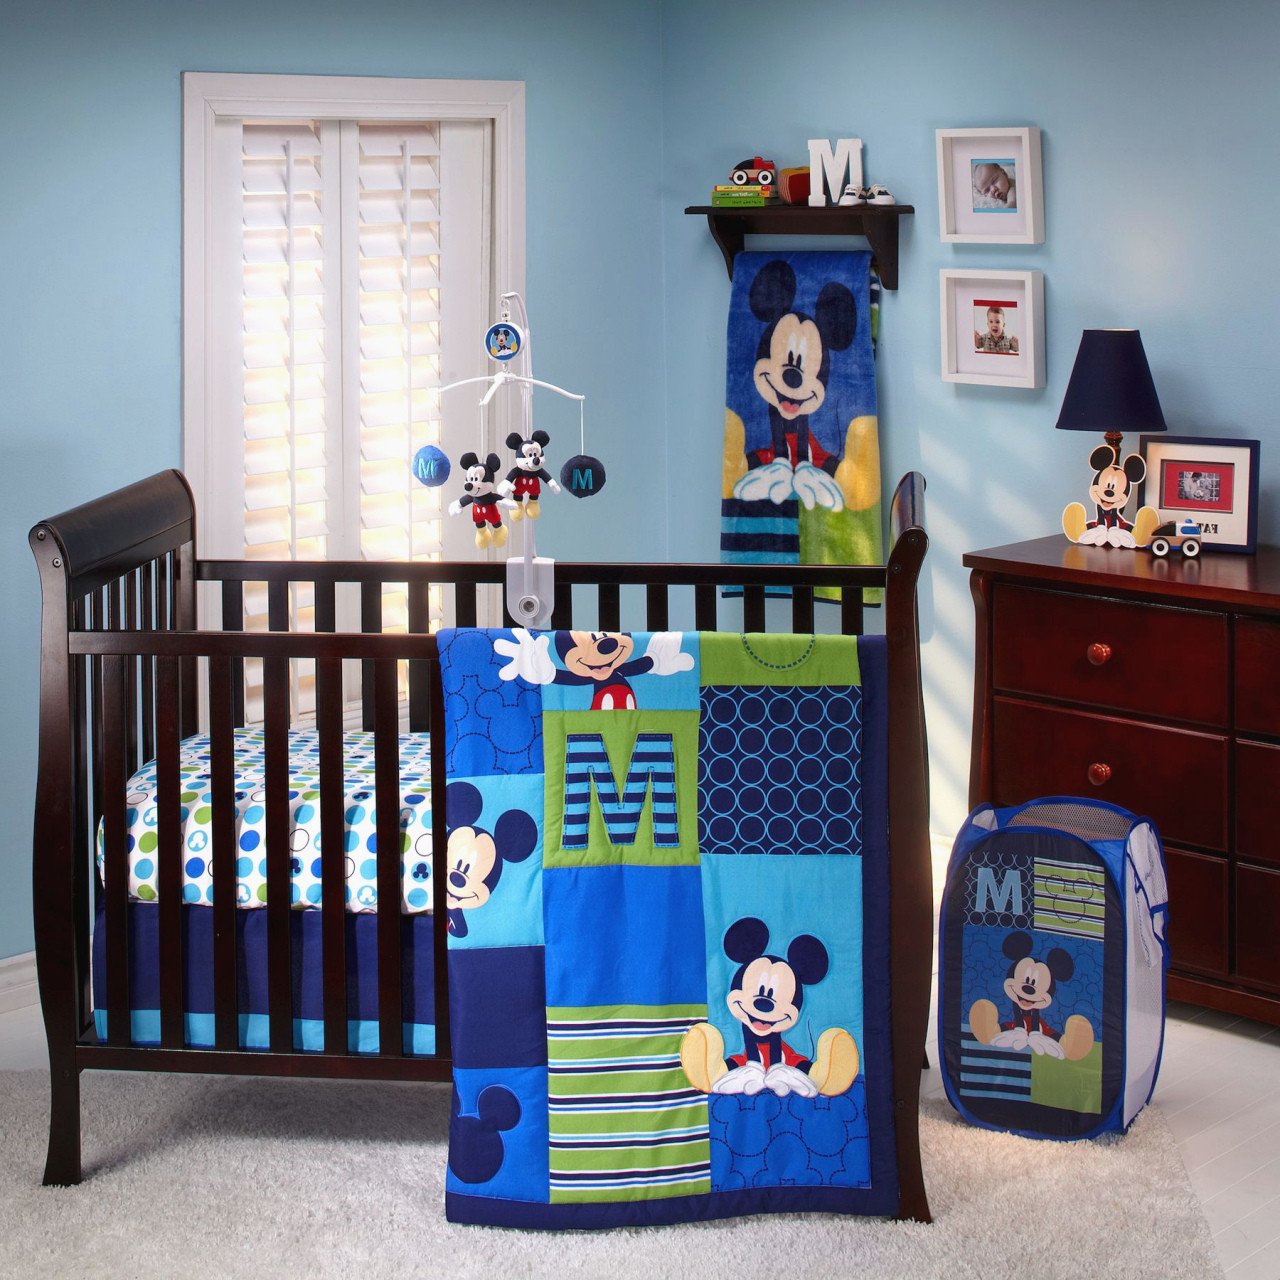 Mickey Mouse Bedroom Accessories Beautiful Mickey Mouse Bedroom Mickey Mouse Bedroom Ideas